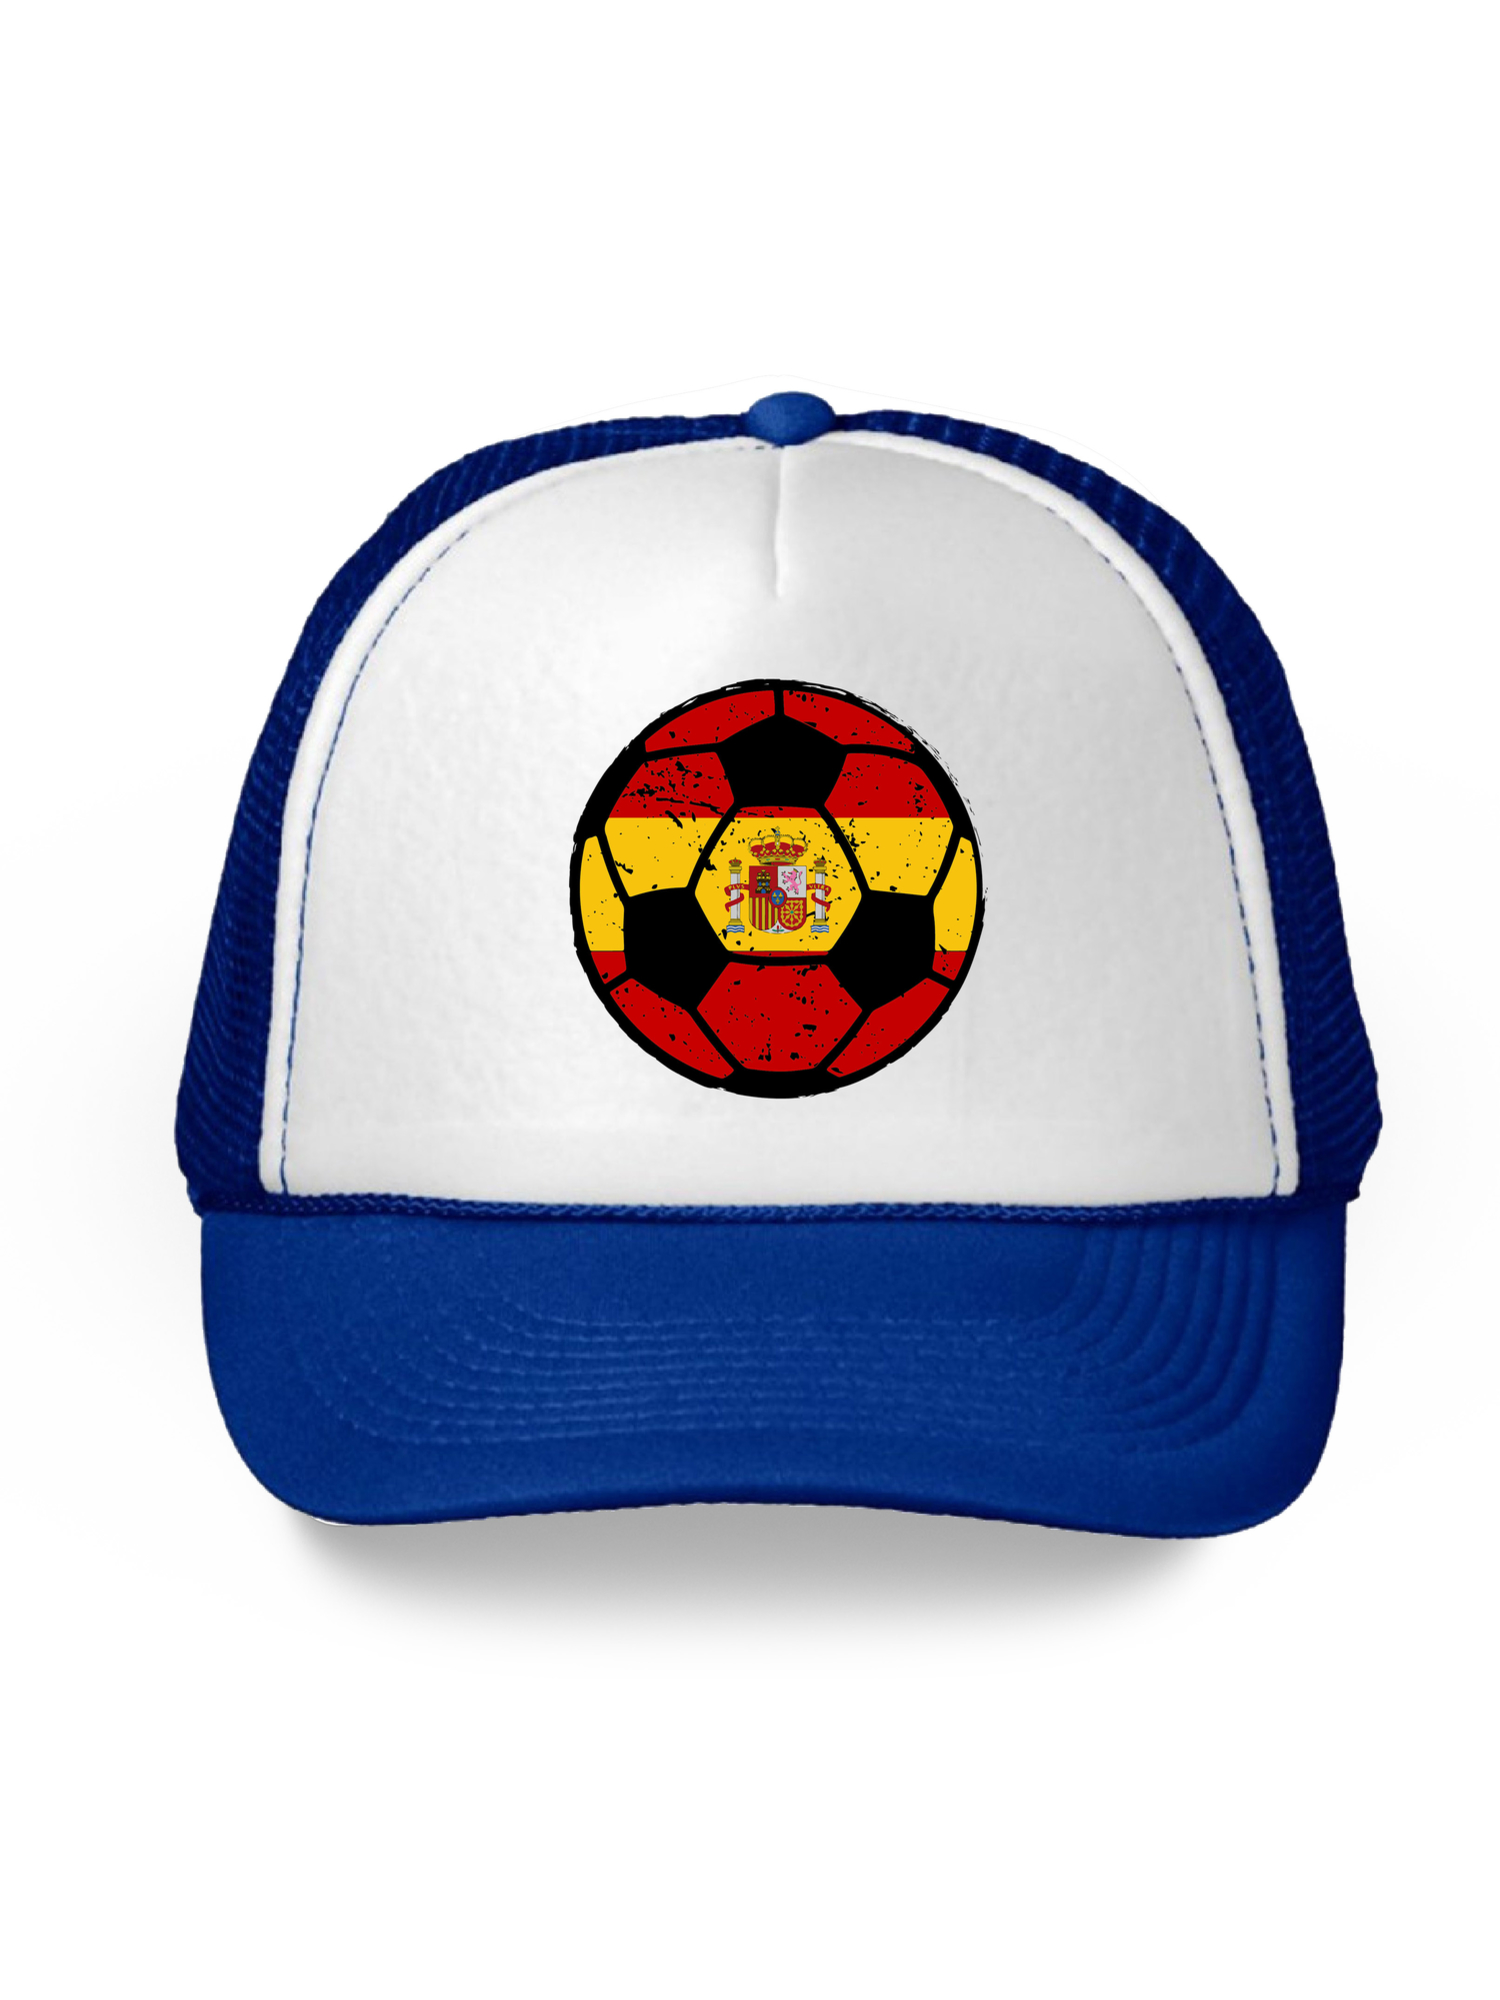 Awkward Styles Spain Soccer Ball Hat Spanish Soccer Trucker Hat Spain 2018 Baseball Cap Spain Trucker Hats for Men and Women Hat Gifts from Spain Spanish Baseball Hats Spanish Flag Trucker Hat - image 1 of 6